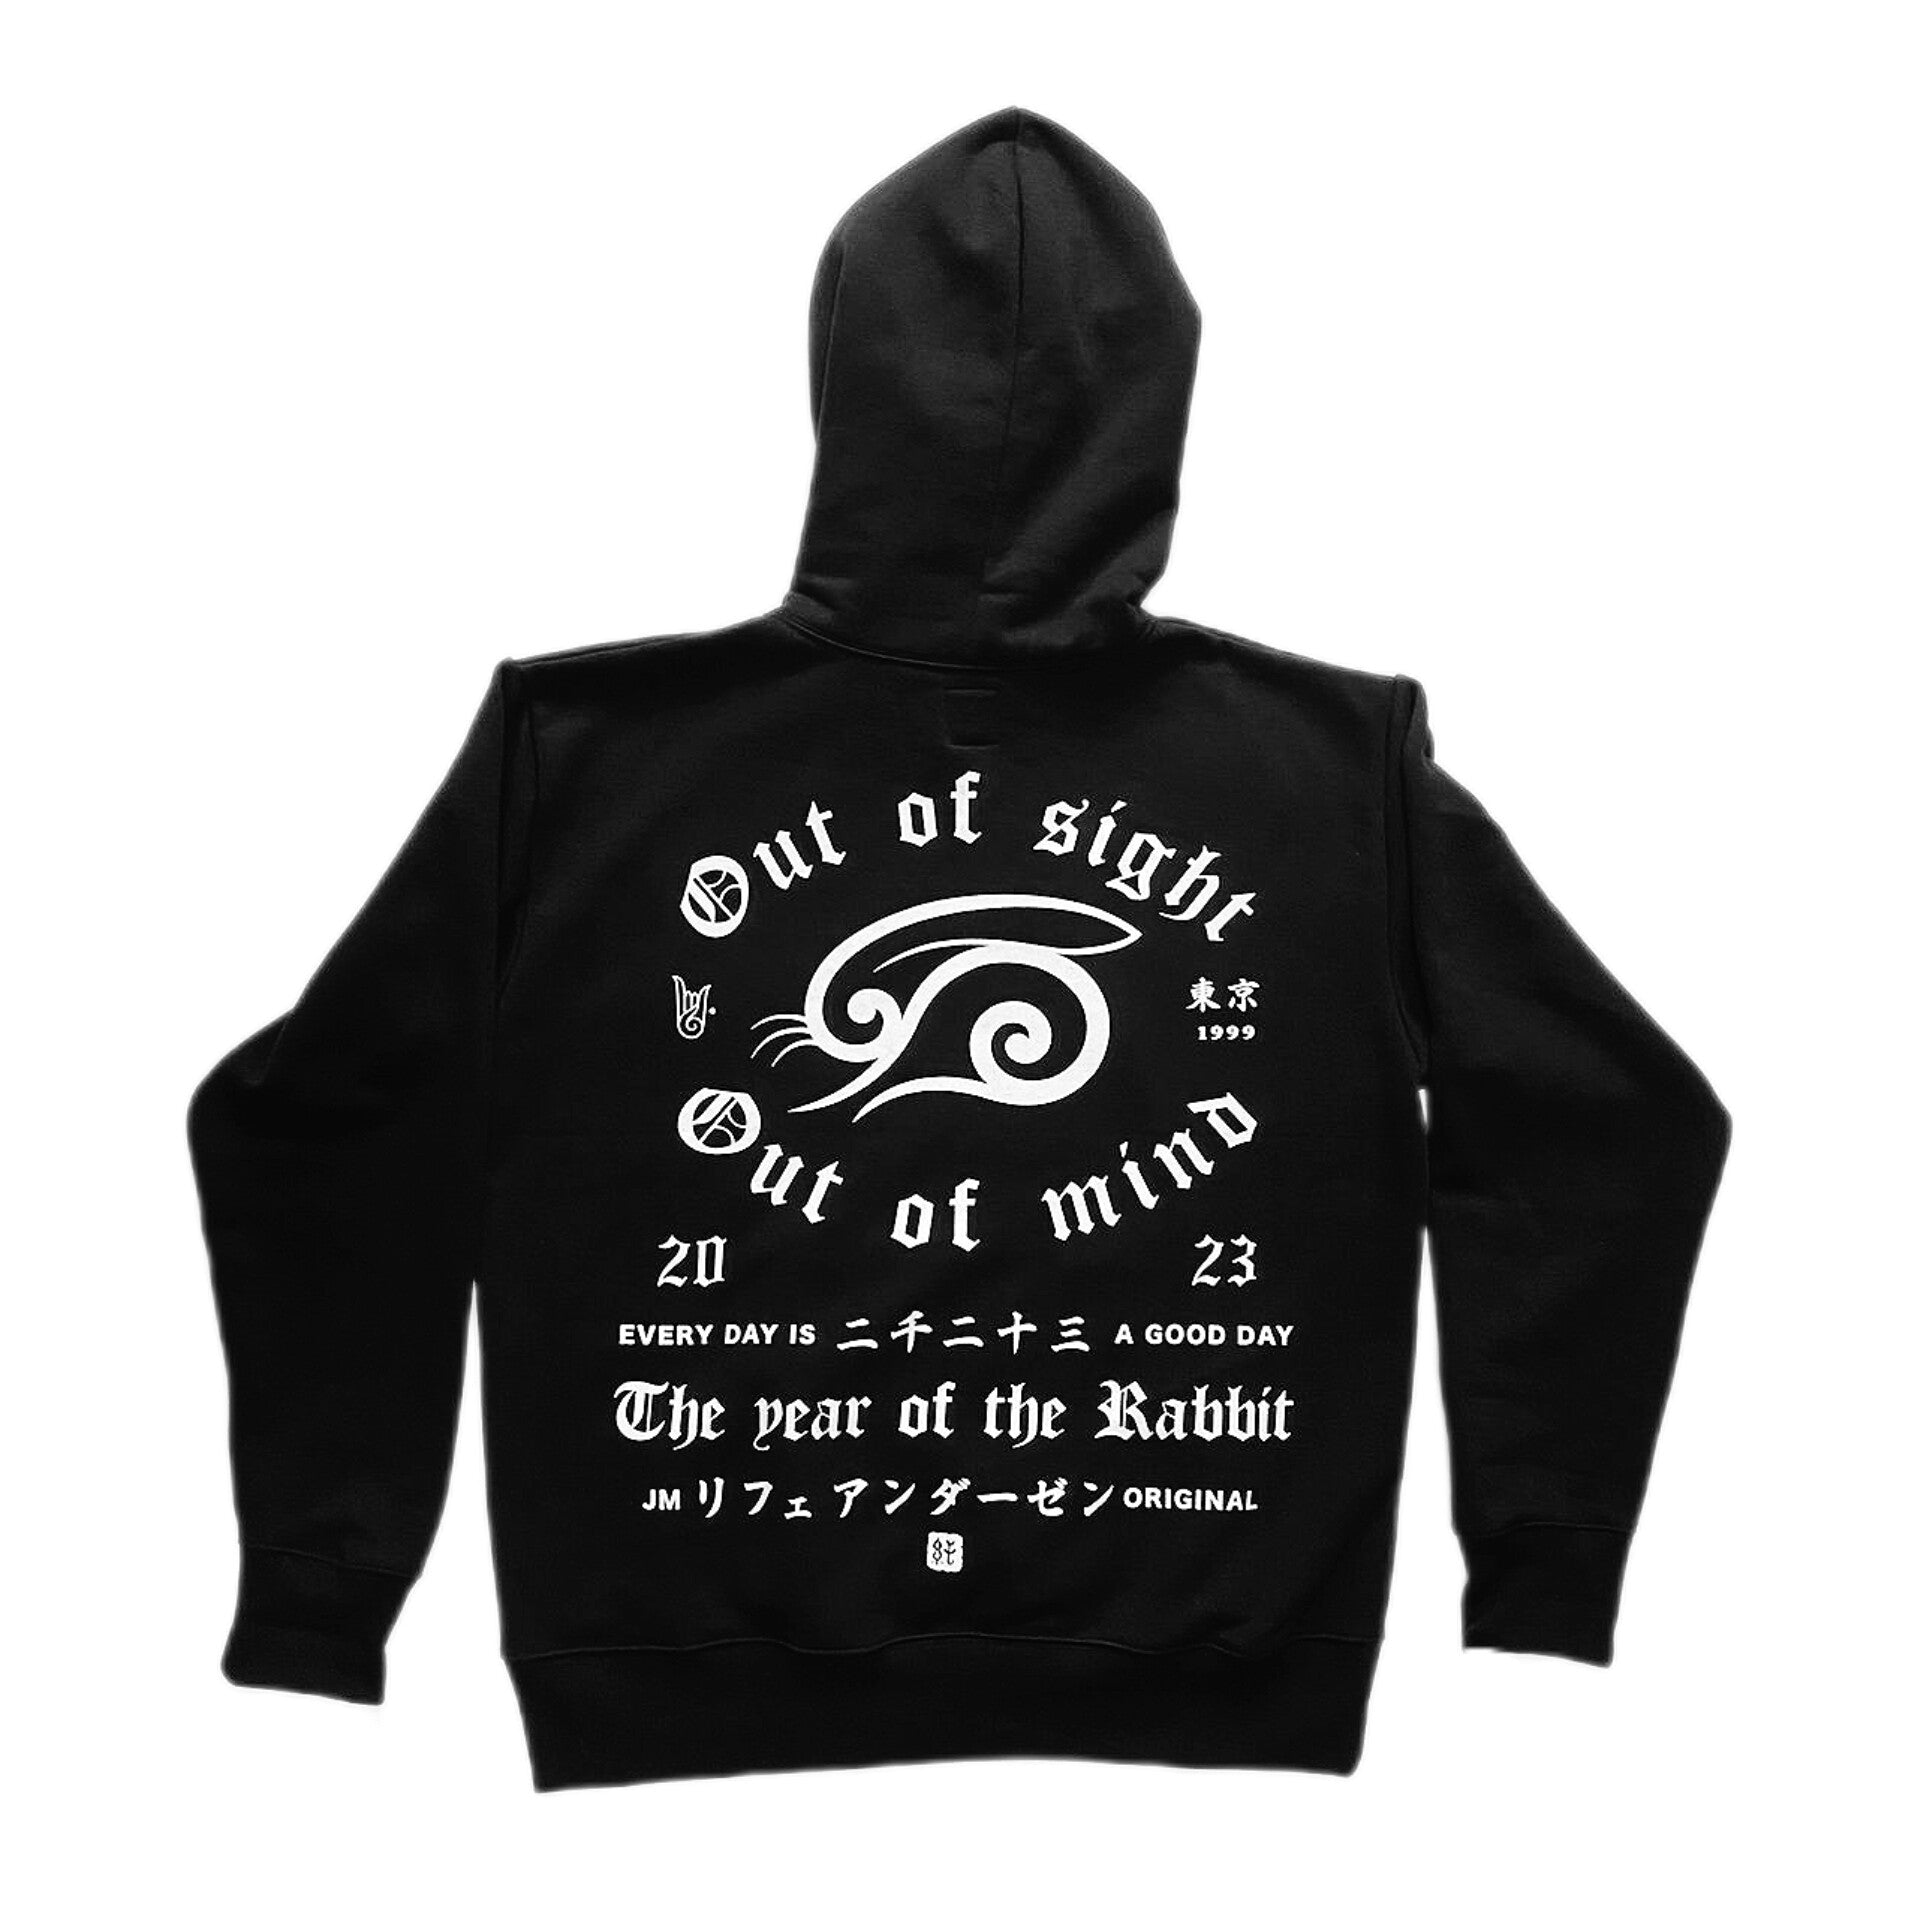 THE YEAR OF THE RABBIT HOODIE